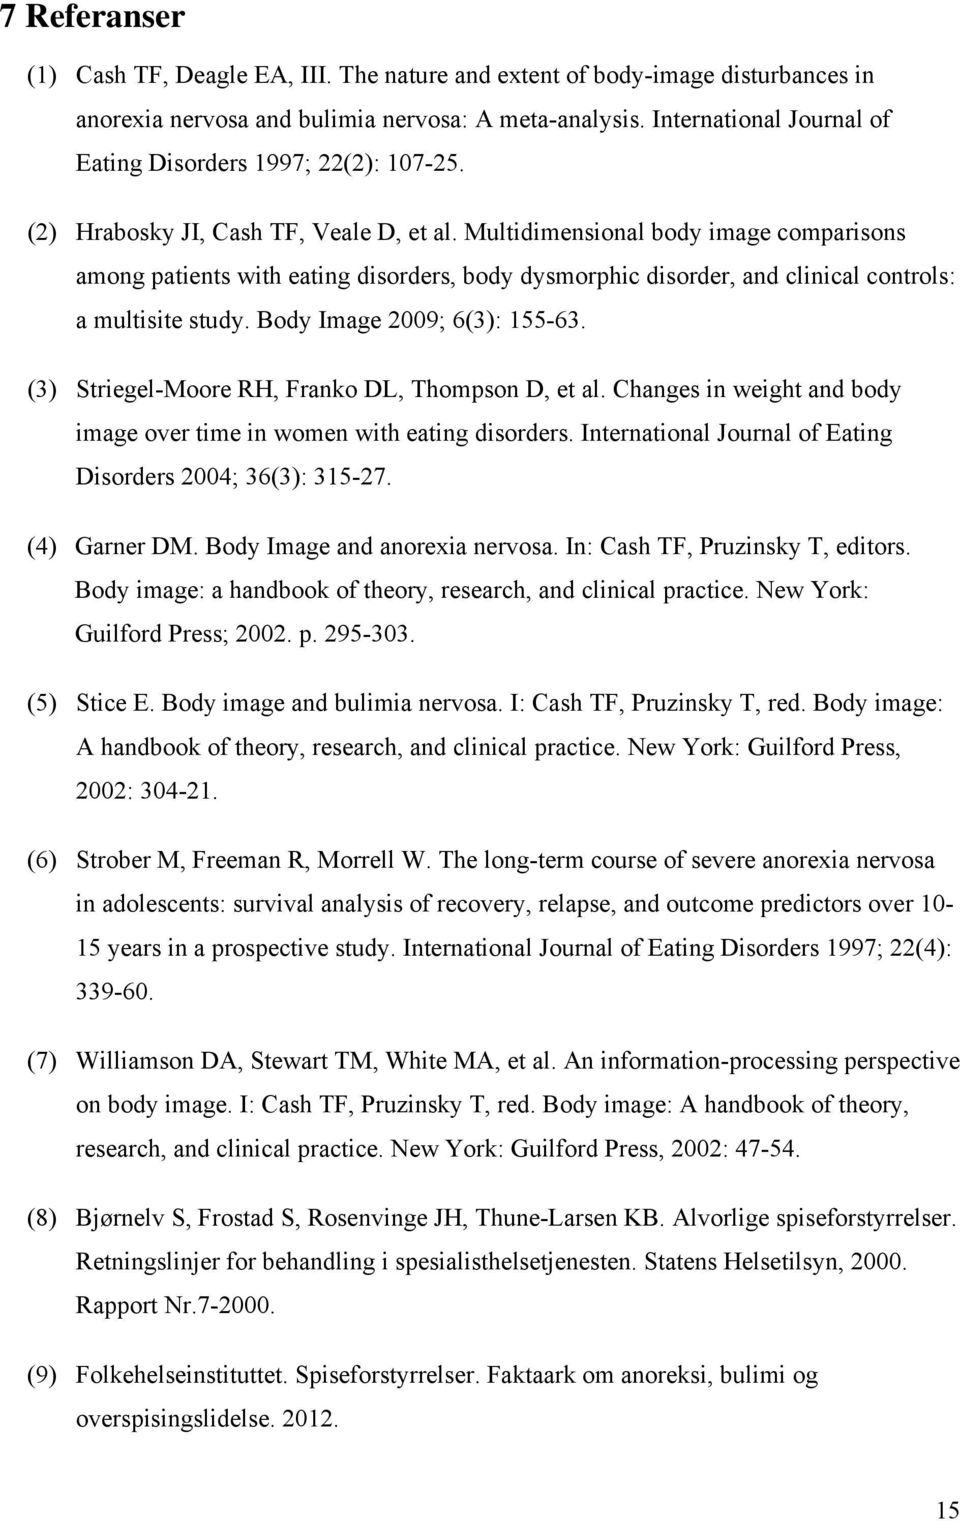 Multidimensional body image comparisons among patients with eating disorders, body dysmorphic disorder, and clinical controls: a multisite study. Body Image 2009; 6(3): 155-63.